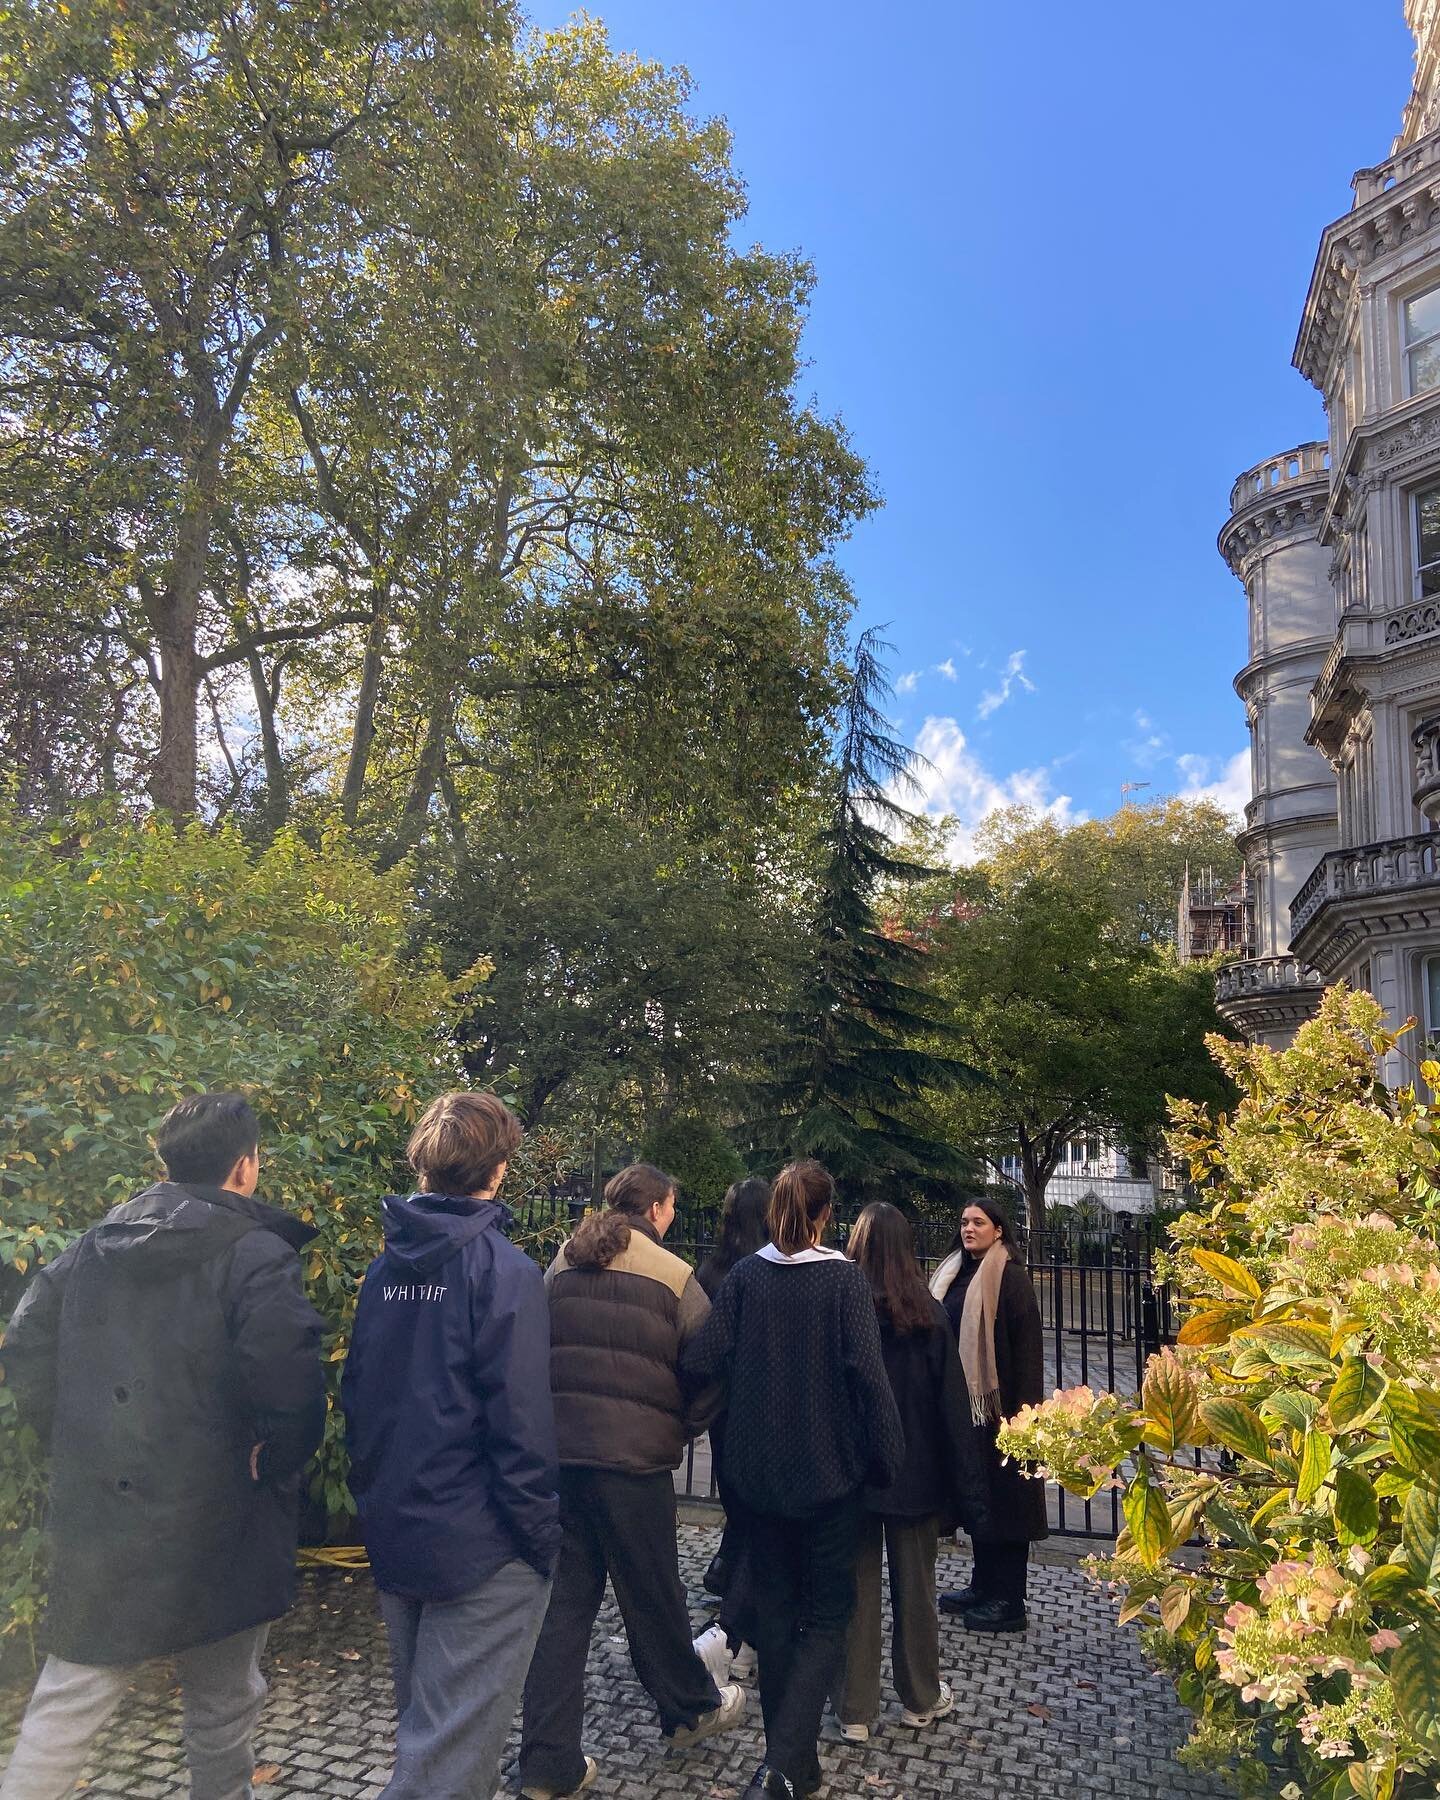 Day 2 - Tour of Legal London!

Focused Future students taking in the sights and sunshine on our tour of the Inns today!
.
.
.
.
#legal #london #lawyer #court #middletemple #middletemplehall #lincolnsinn #graysinn #innertemple #sixthform #careers #asp